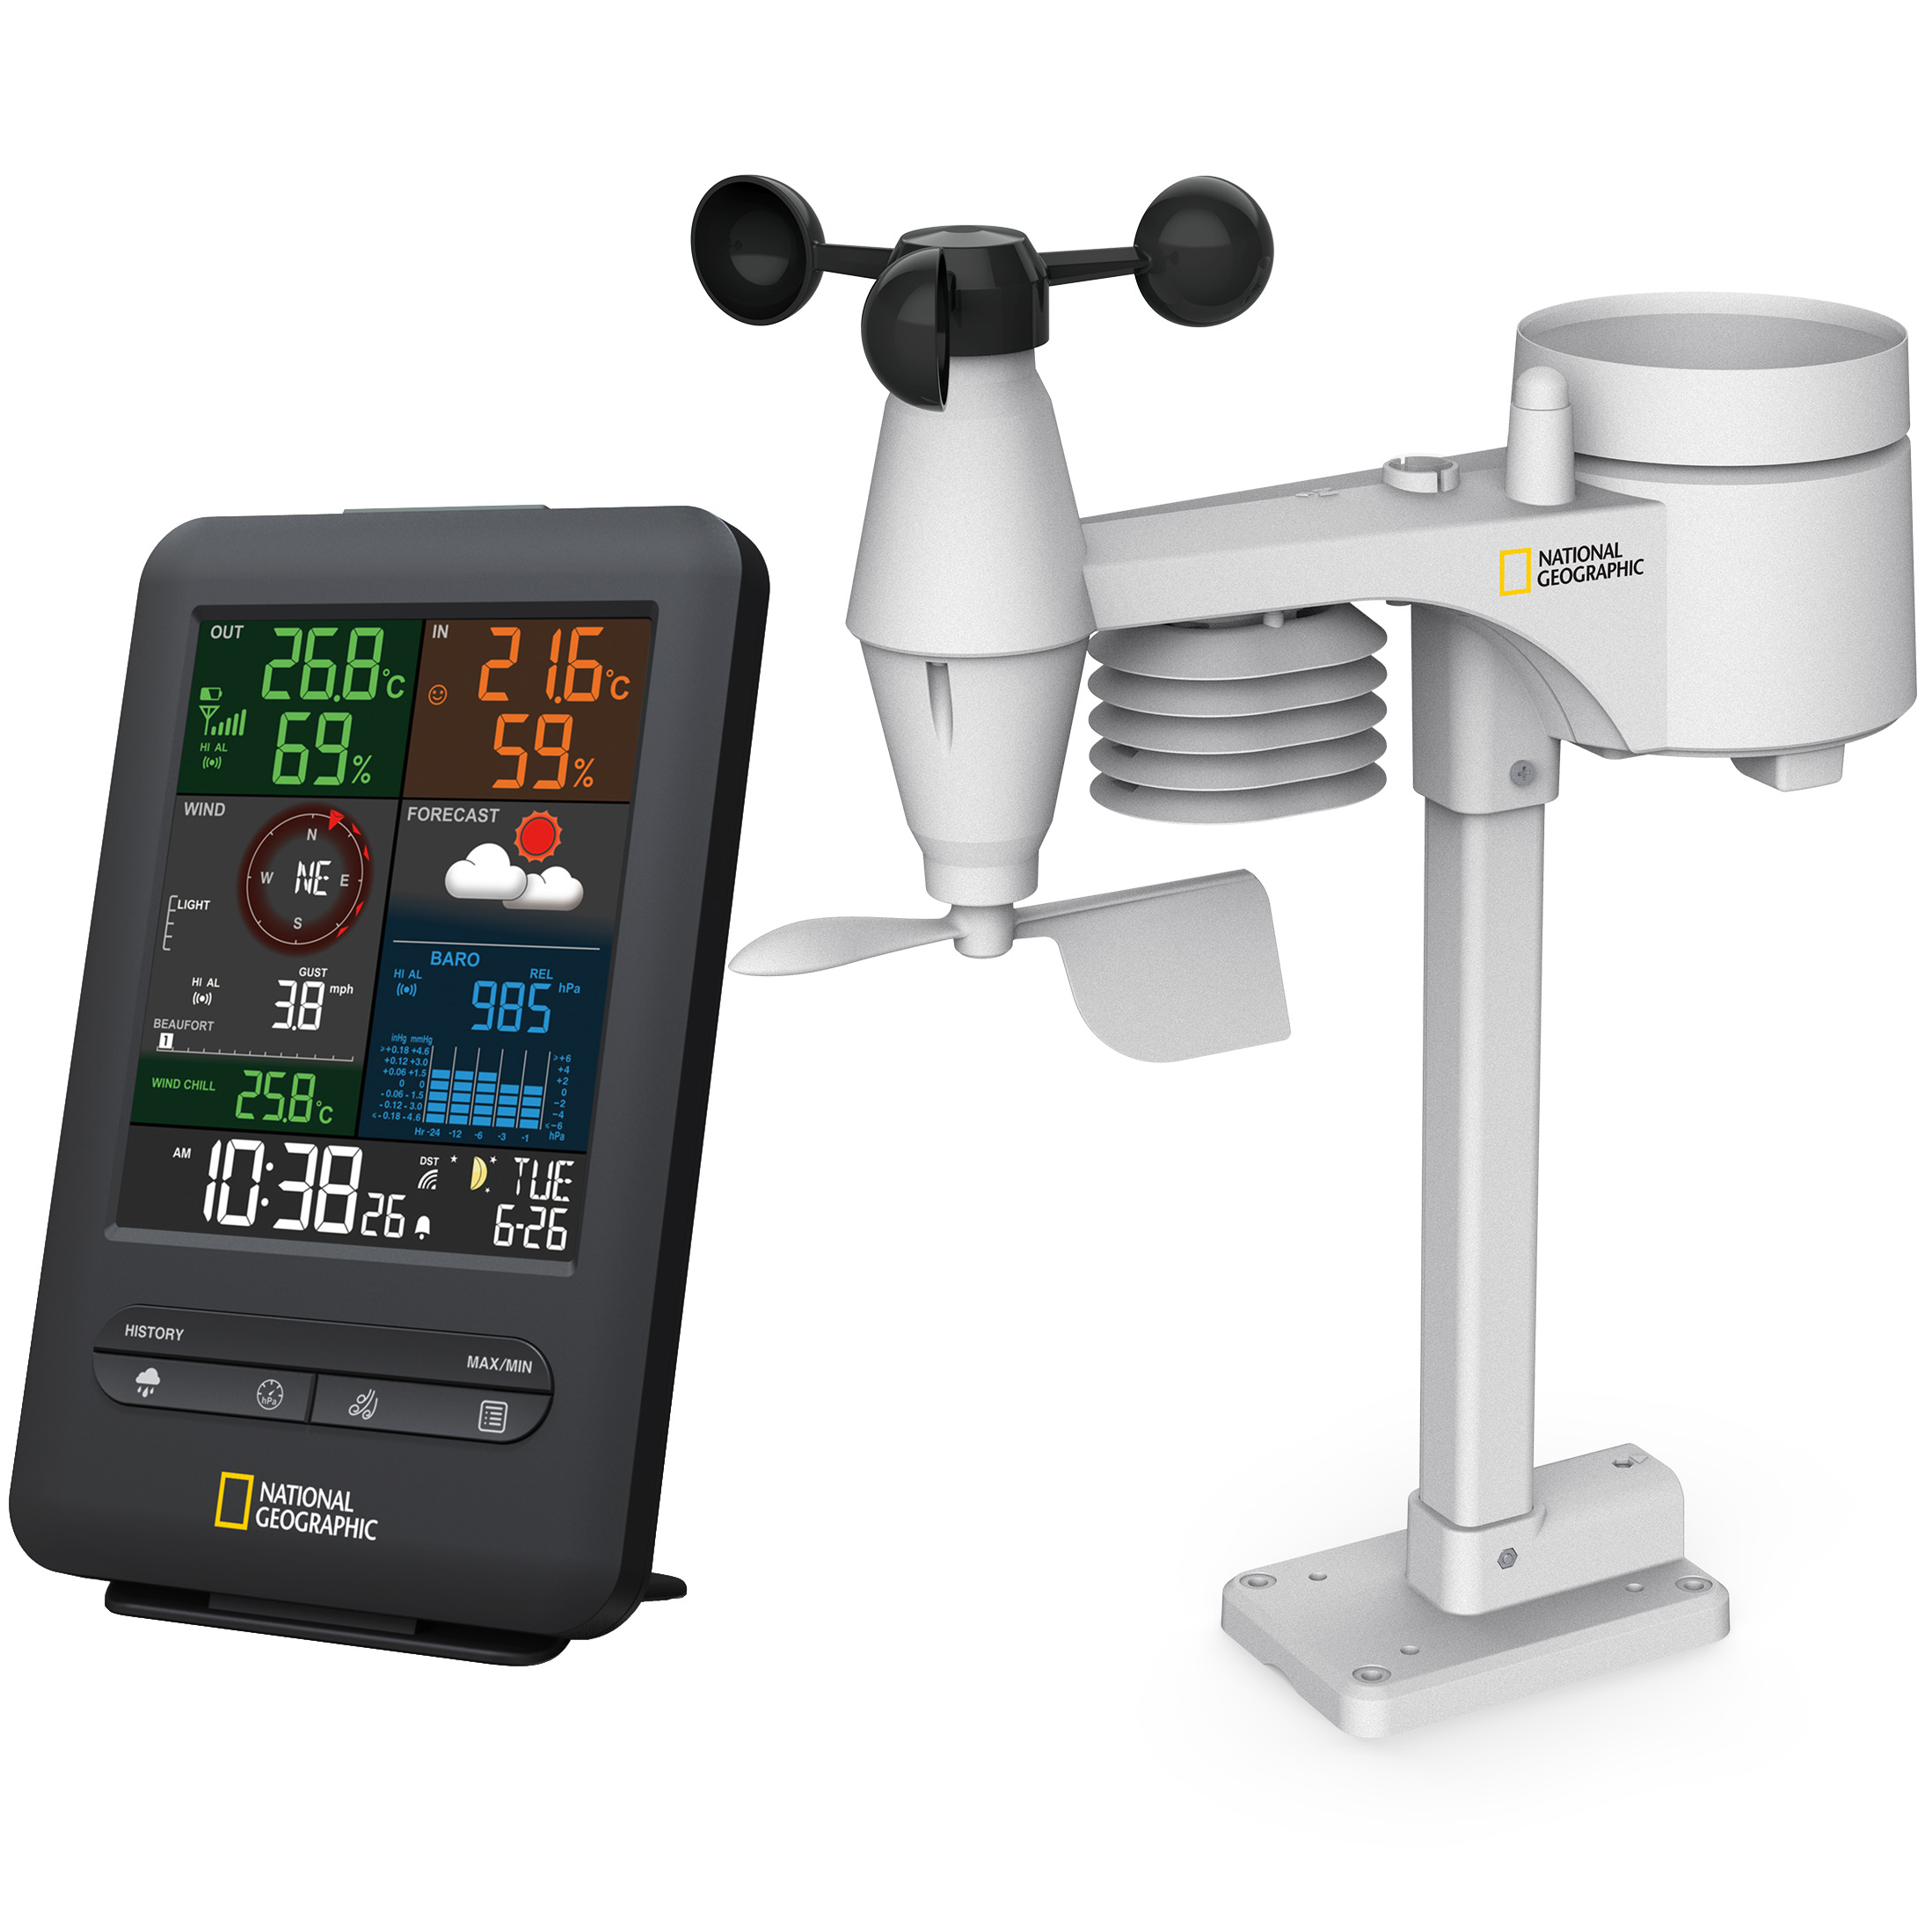 NATIONAL GEOGRAPHIC 256-Colour and RC Weather Station 5-in-1